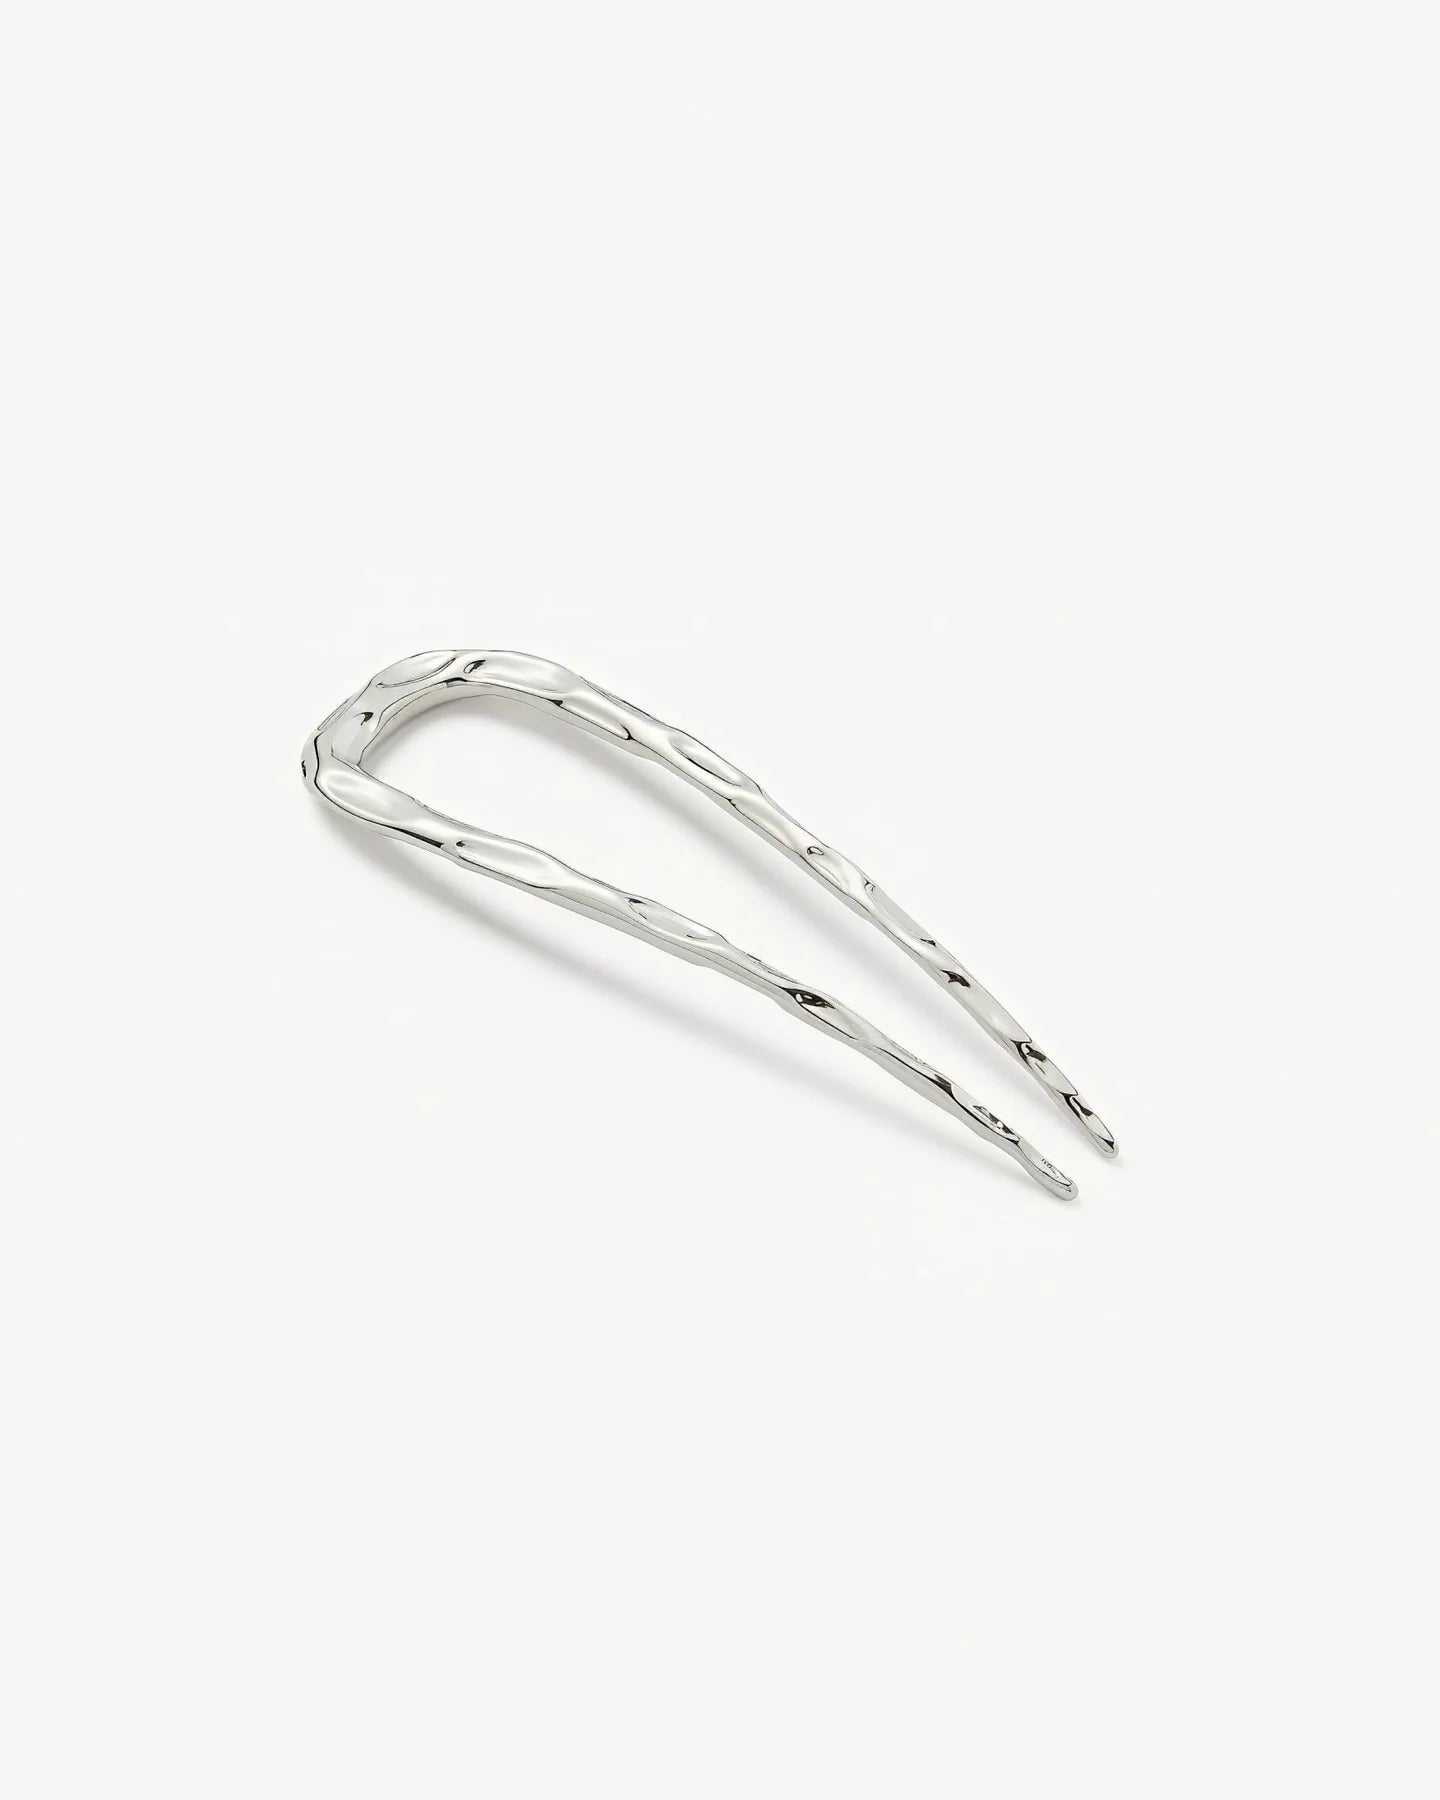 Wavy Silver French Hairpin